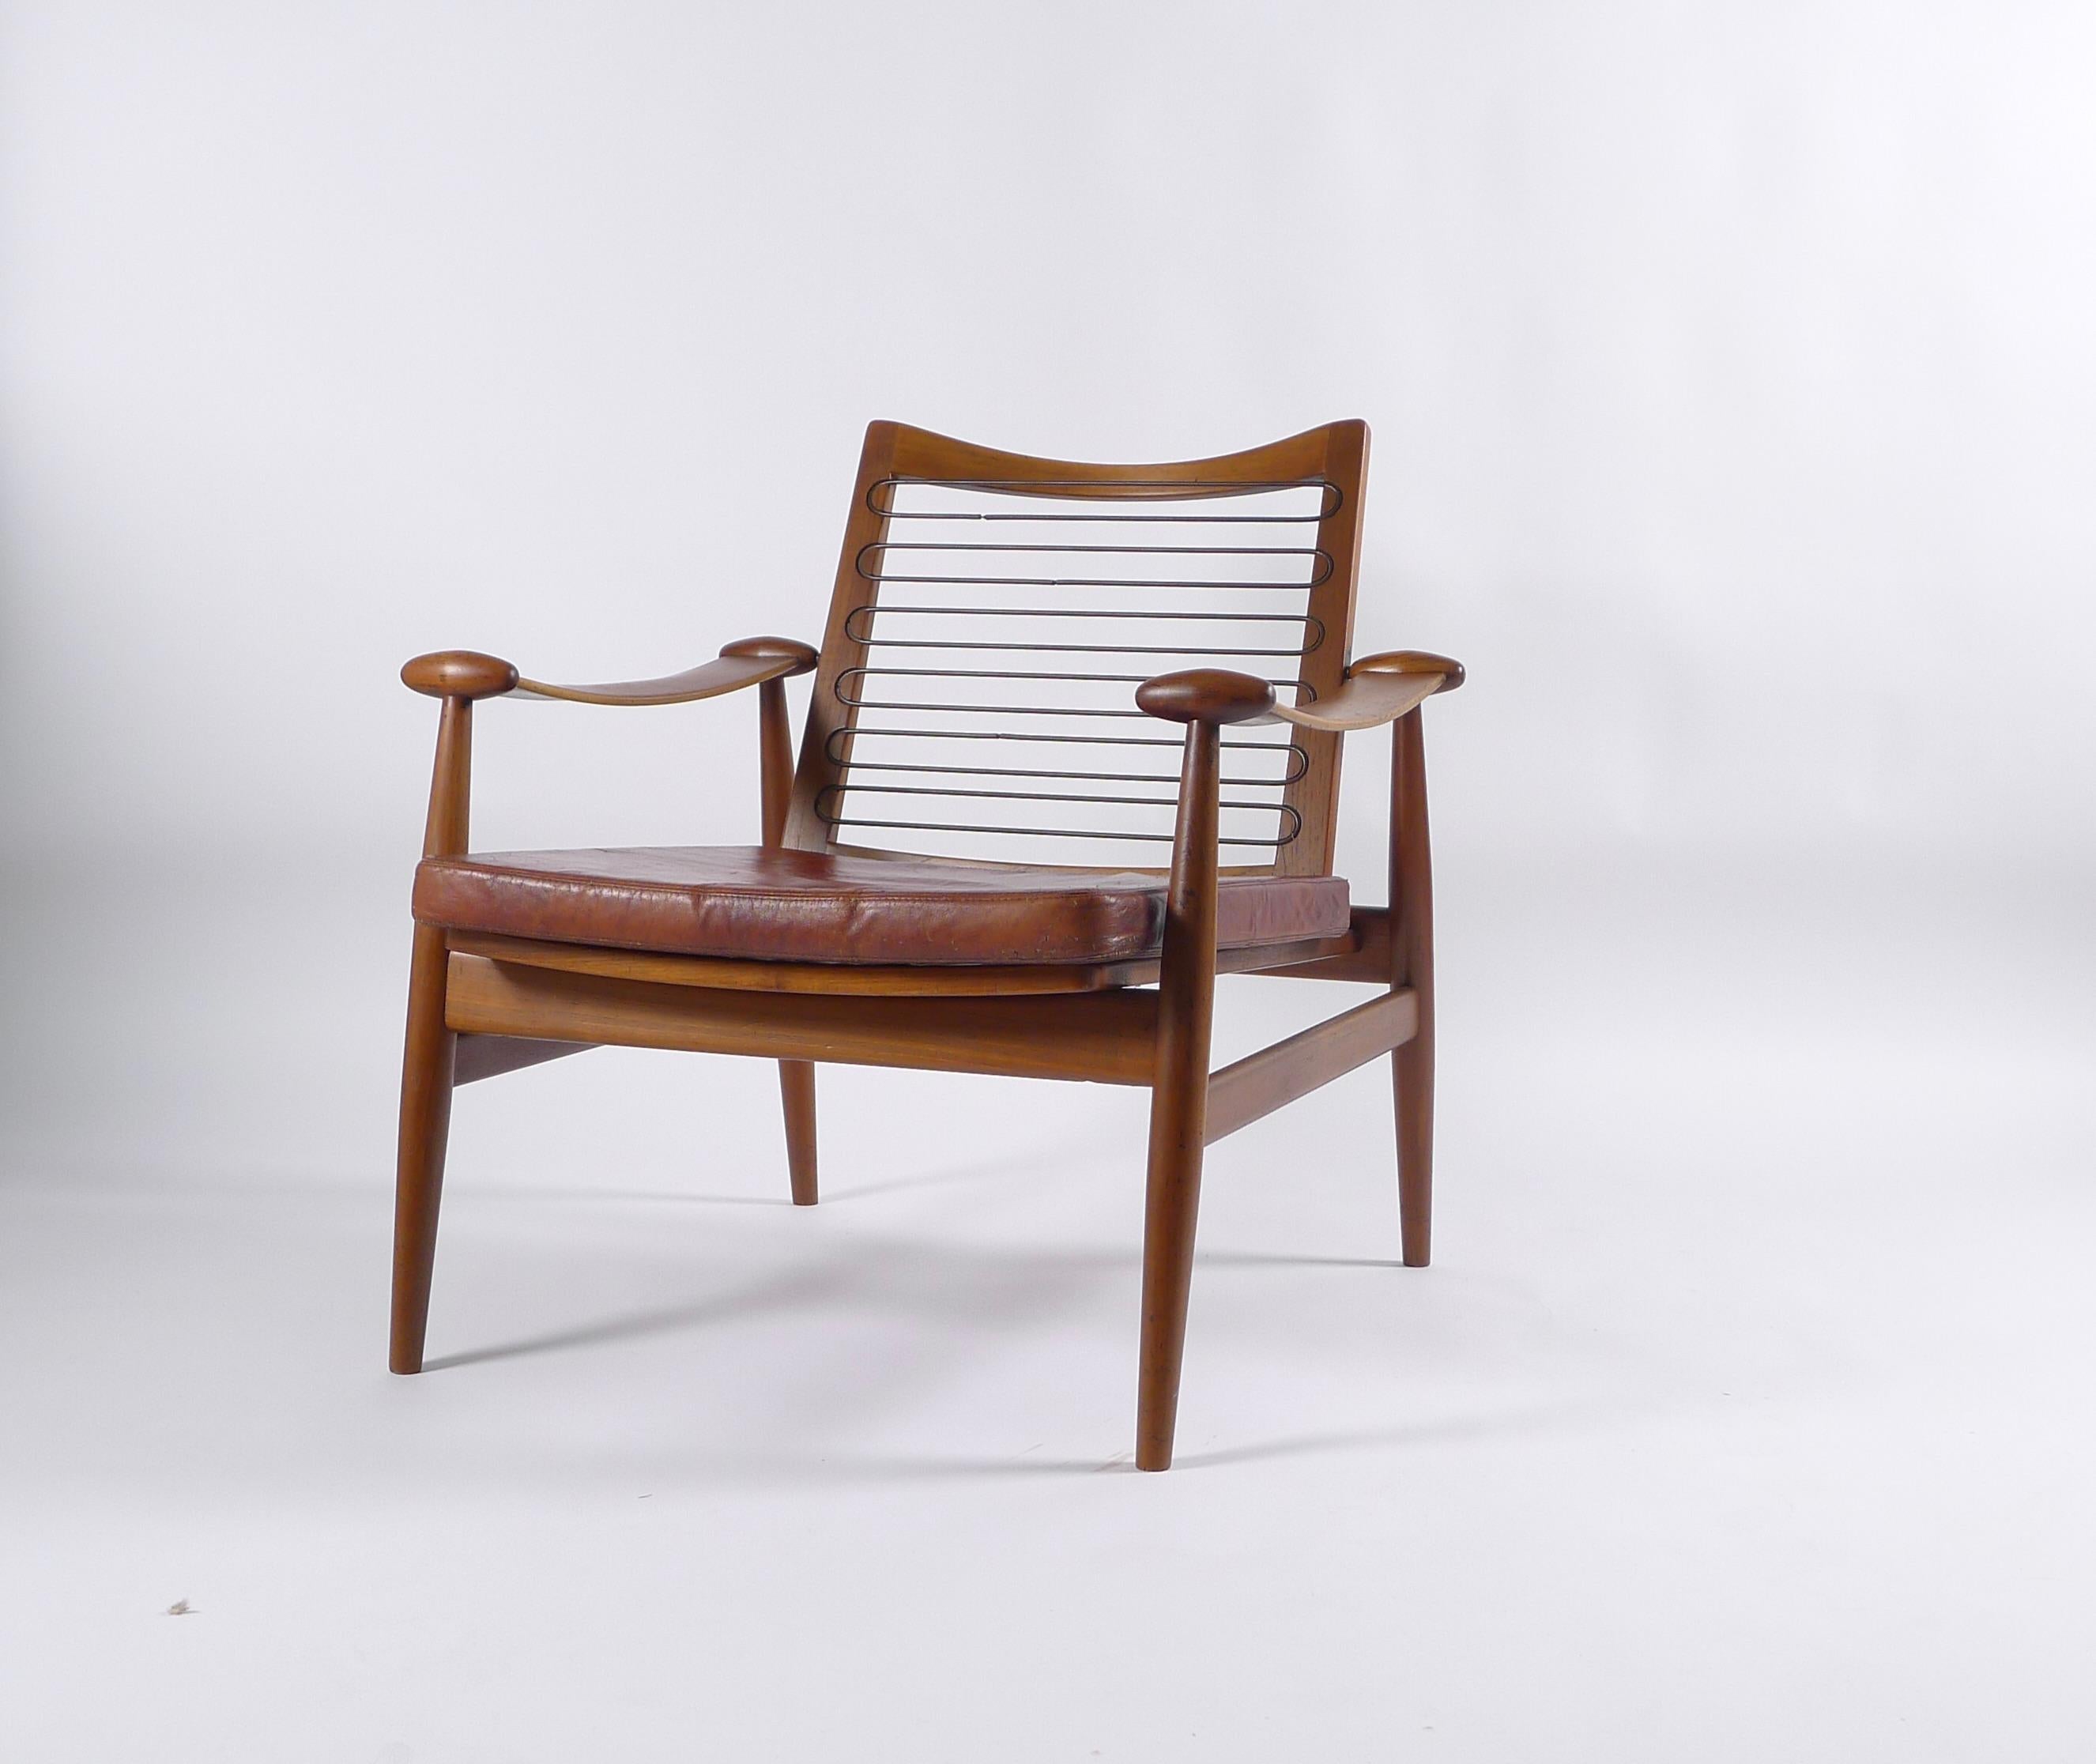 Finn Juhl Spade Chair, Model Fd133, 1950s, Produced by France & Son, with Label 4